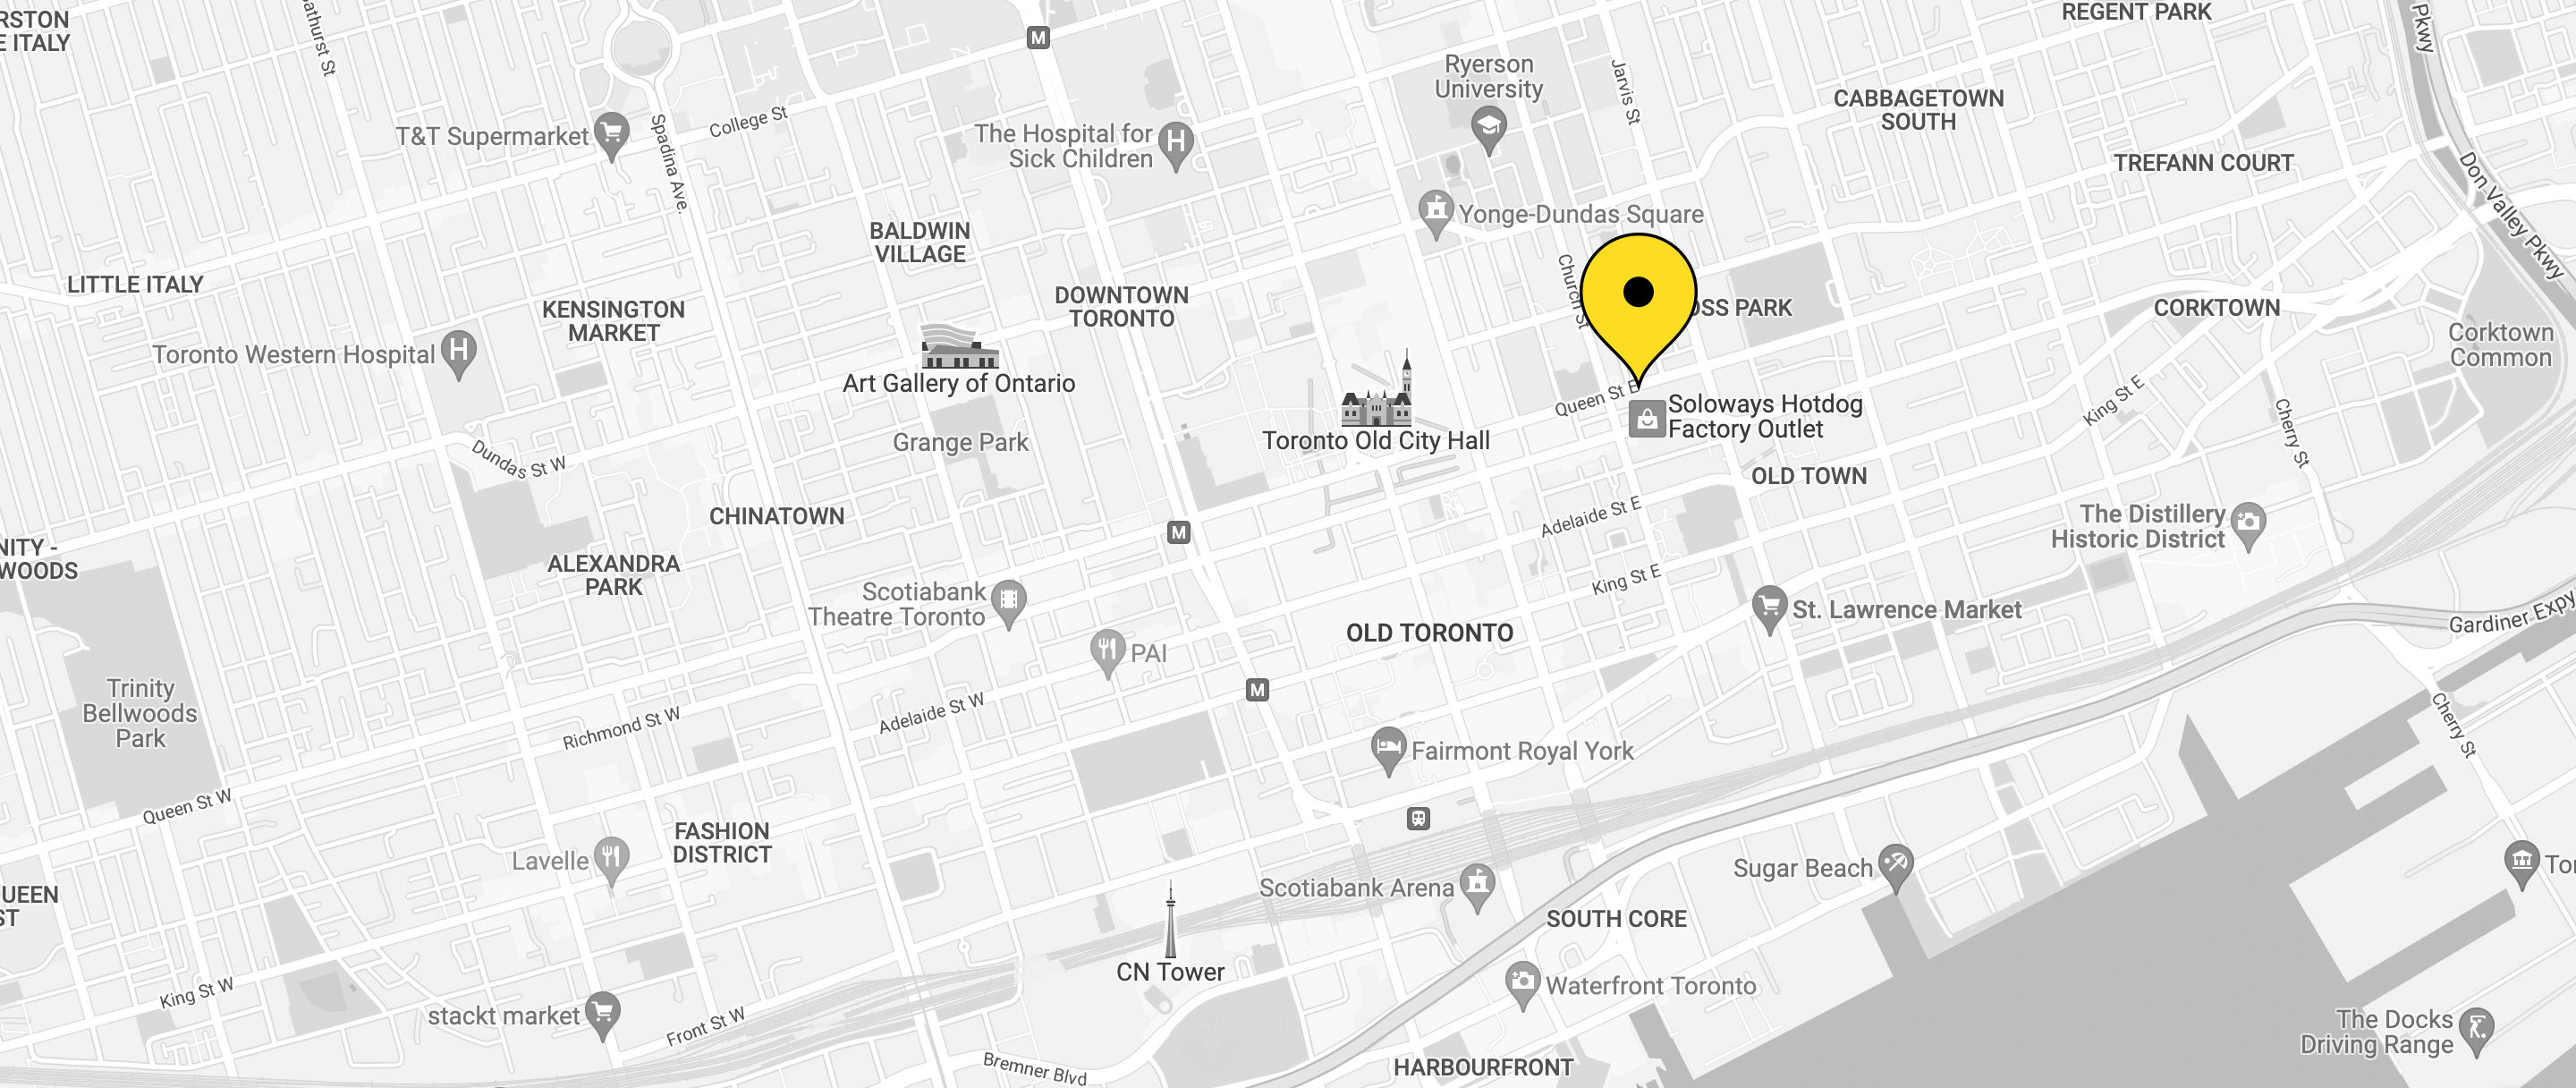 Toronto office location indicated with a yellow pin on grey street map